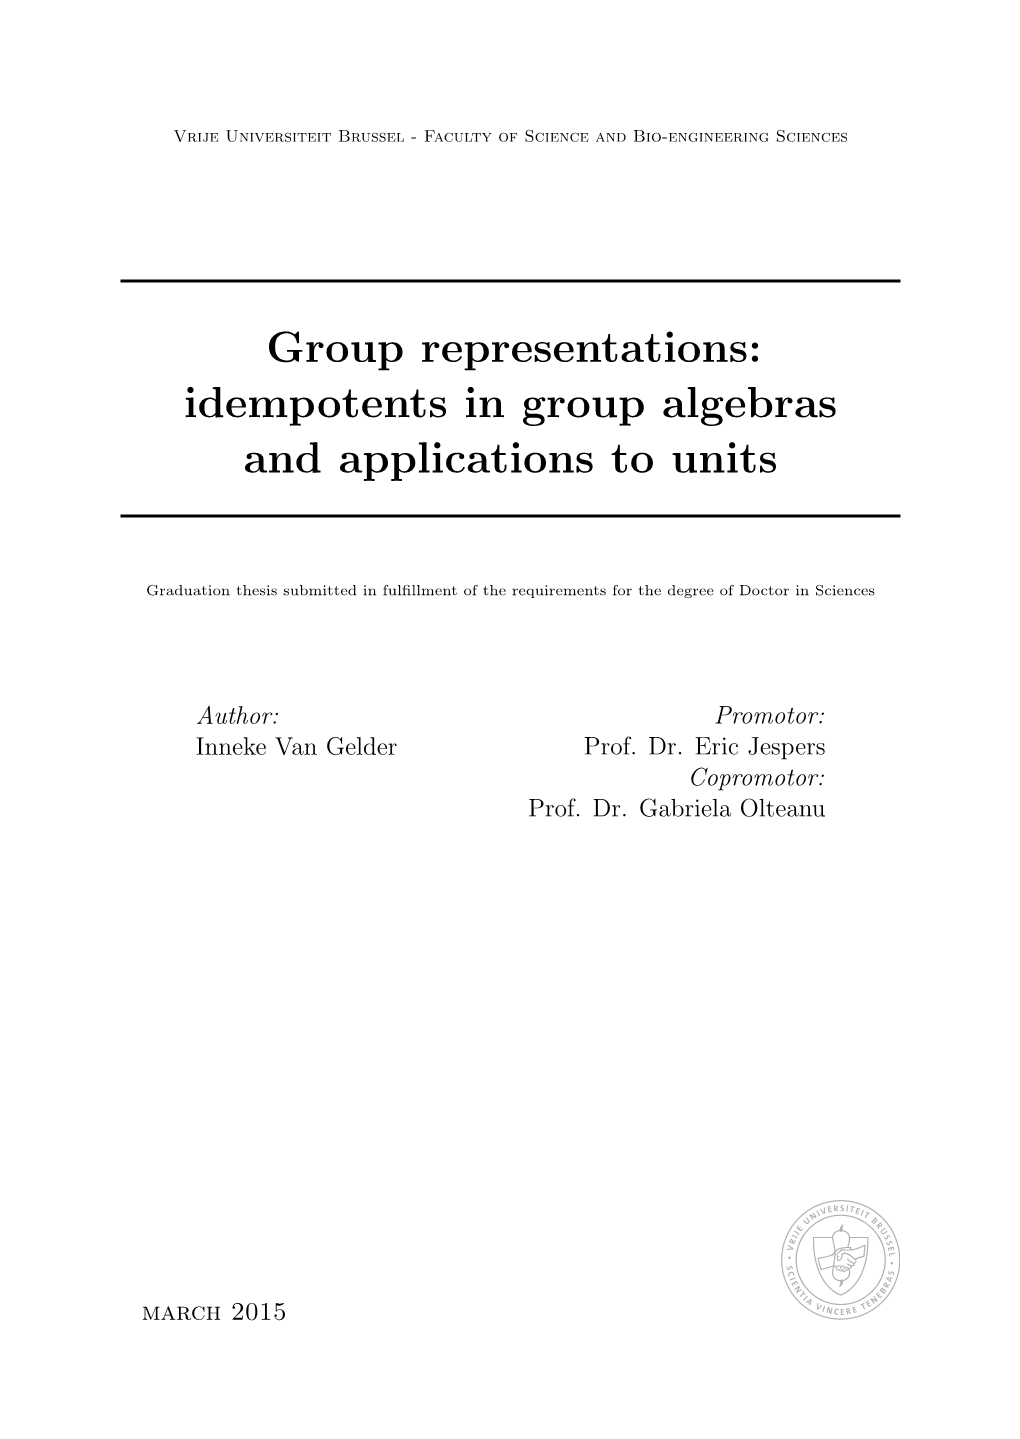 Idempotents in Group Algebras and Applications to Units